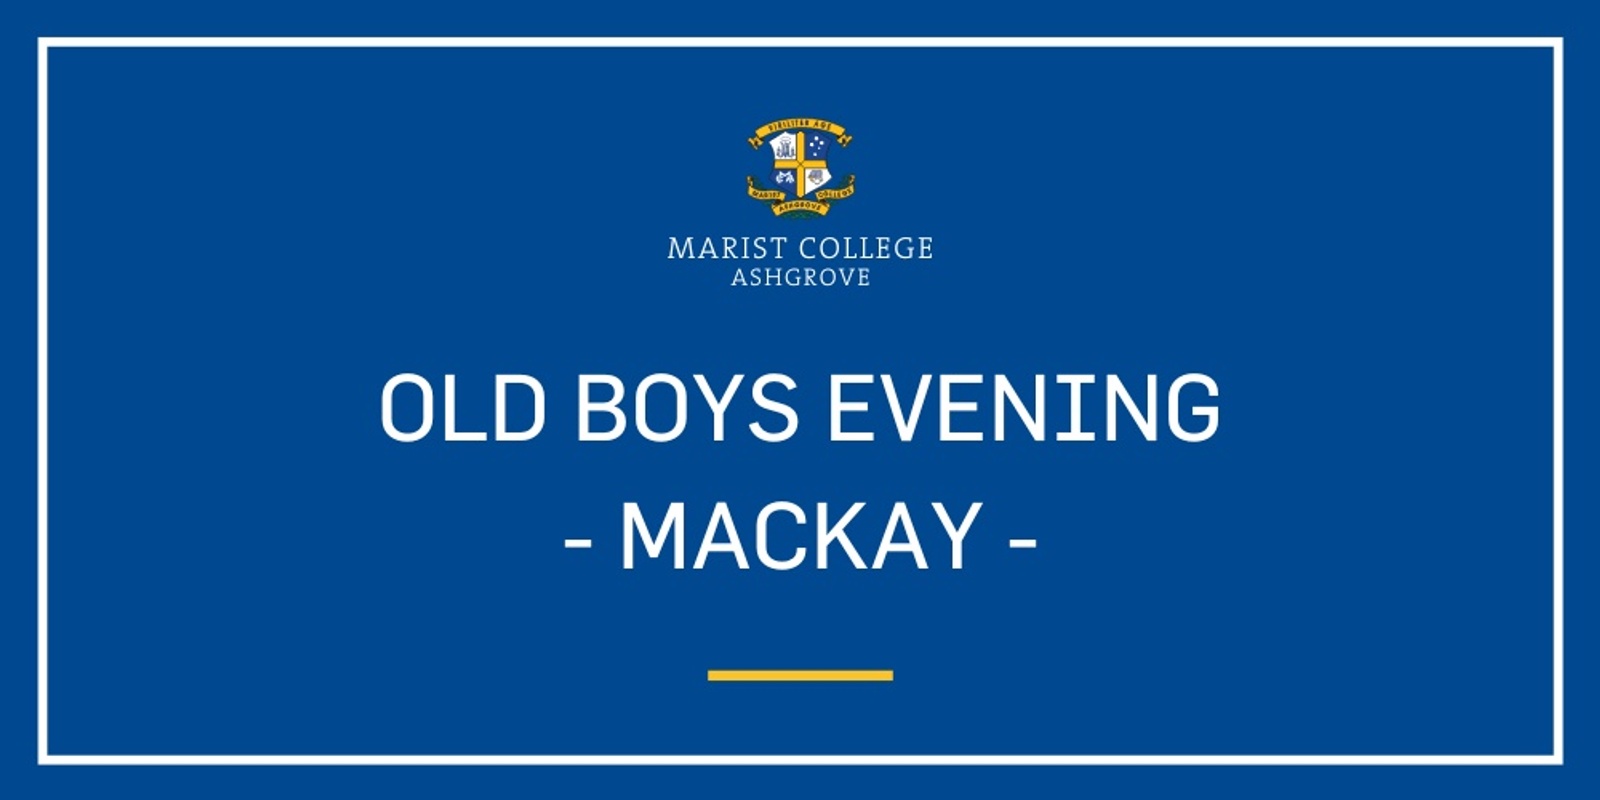 Banner image for Marist College Ashgrove Old Boys Evening - Mackay